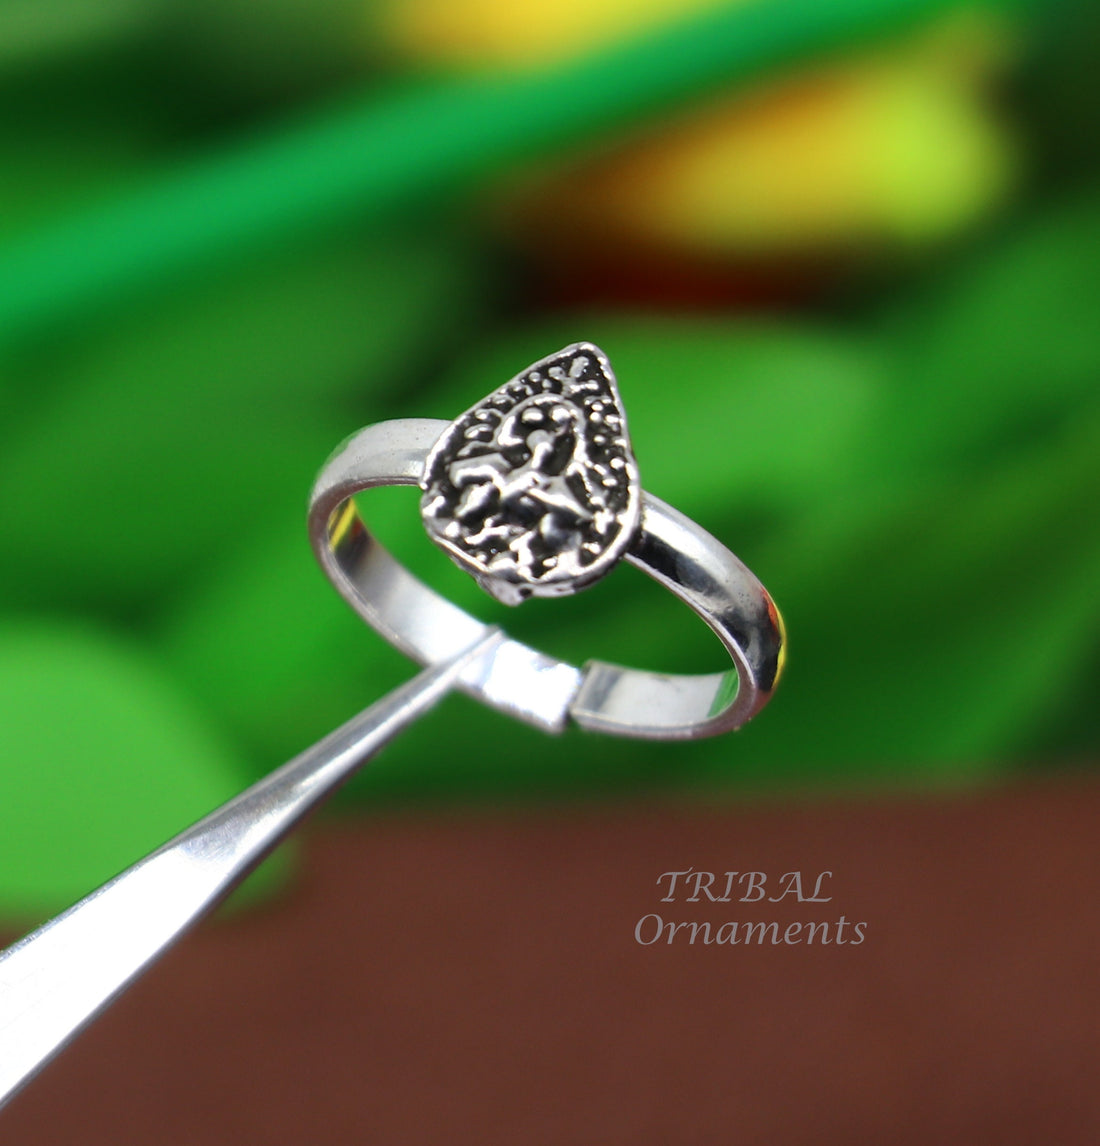 925 sterling silver handmade fabulous peacock design toe ring band tribal belly dance vintage style ethnic jewelry ytr37 - TRIBAL ORNAMENTS